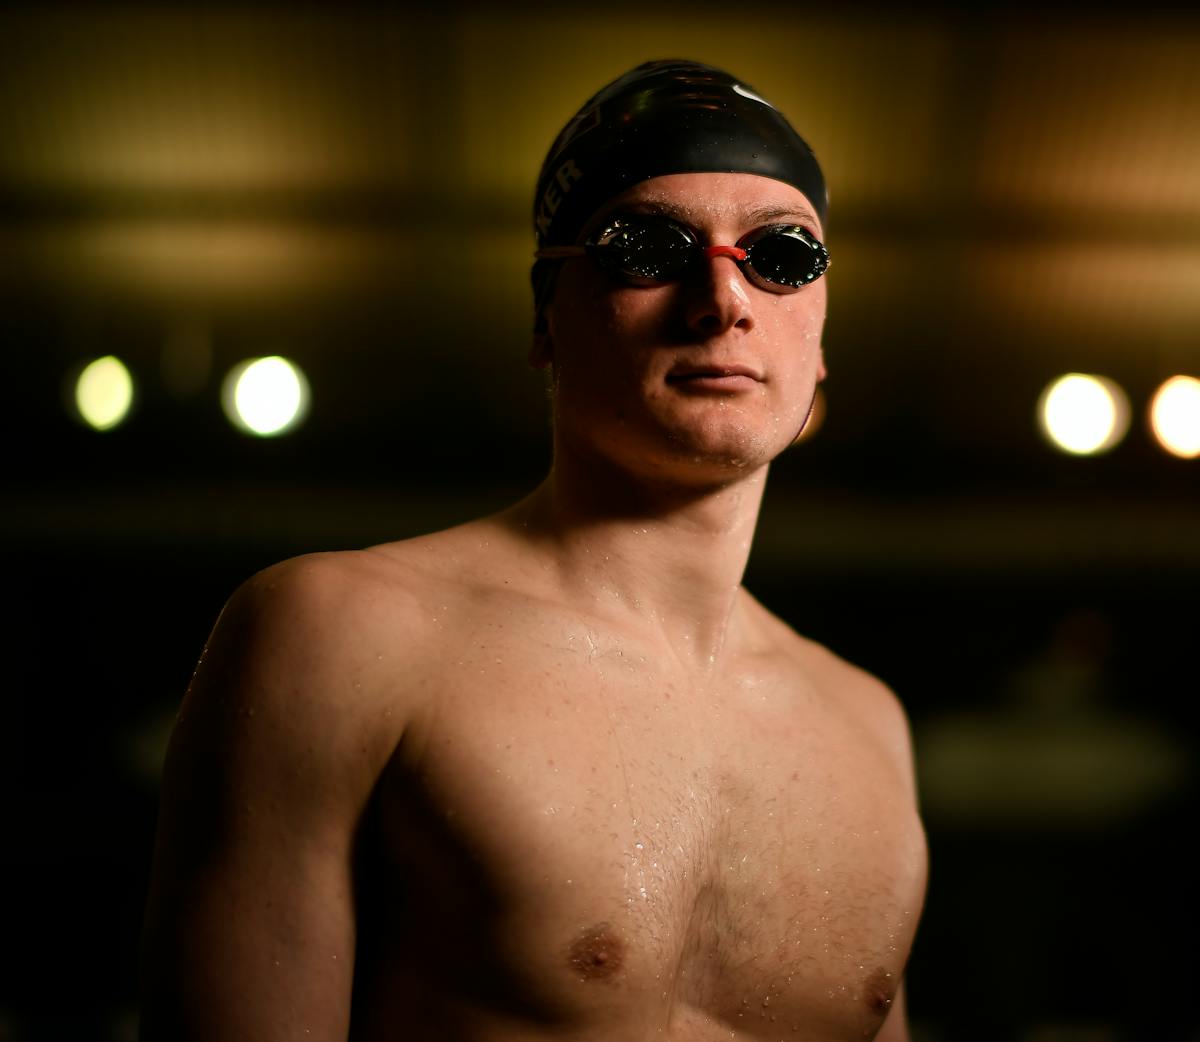 ] AARON LAVINSKY &#xef; aaron.lavinsky@startribune.com Bowen Becker won the 50 freestyle race at the Big Ten meet and set a conference record. In the 